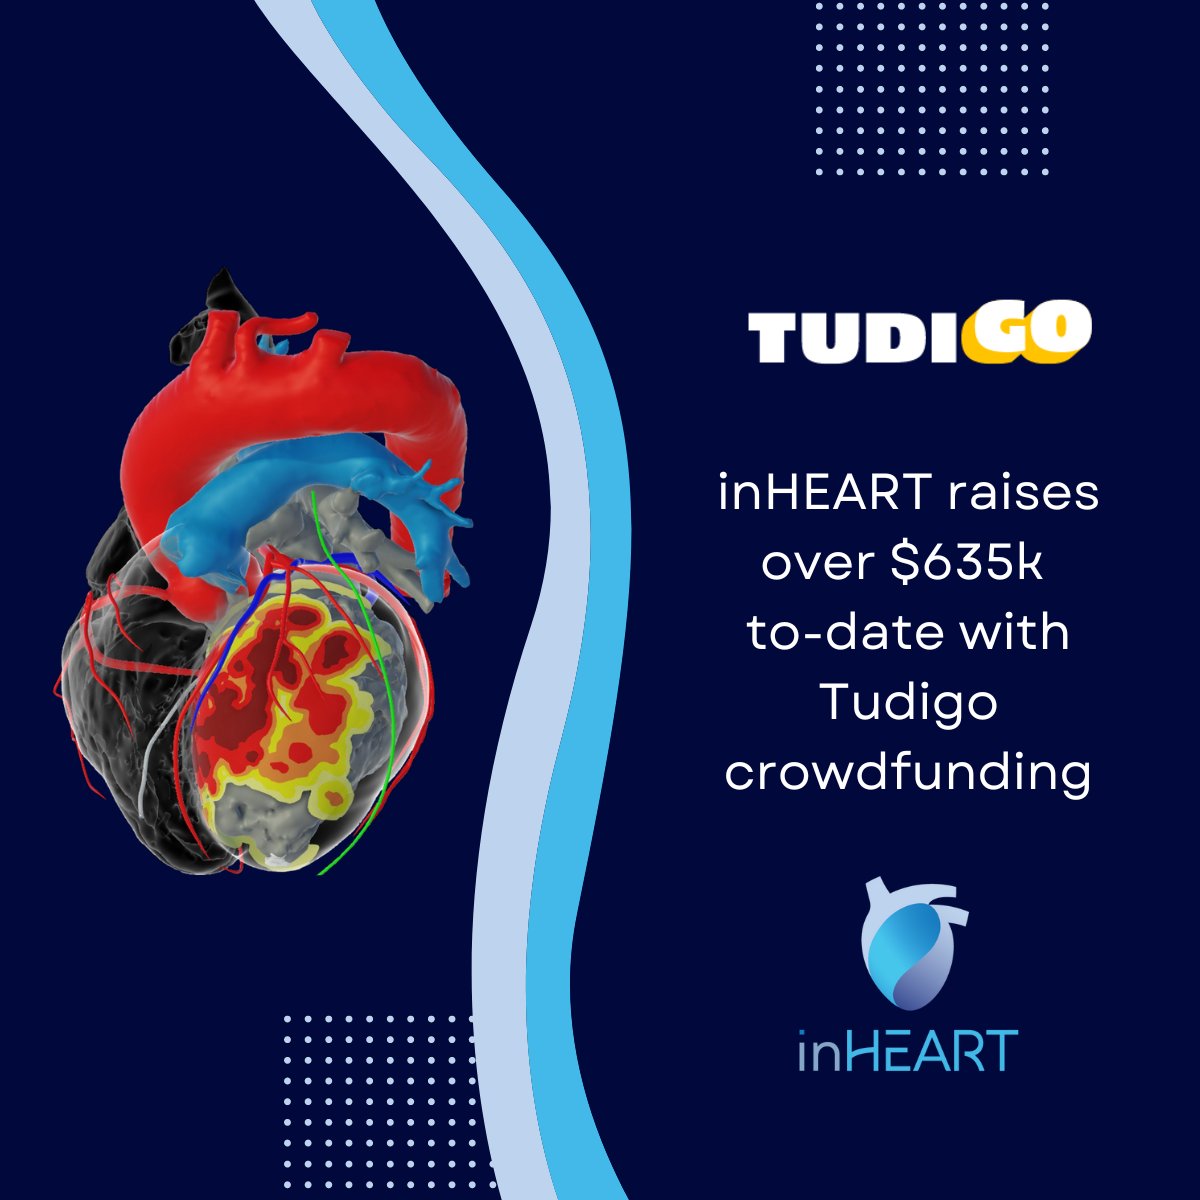 inHEART is excited to announce that we have exceeded our goal of $500k with our Tudigo crowdfunding efforts!!! We have currently raised over $635k…and that number is growing every day. Congrats to the inHEART team.
#tudigo #startupinvesting #MedTech